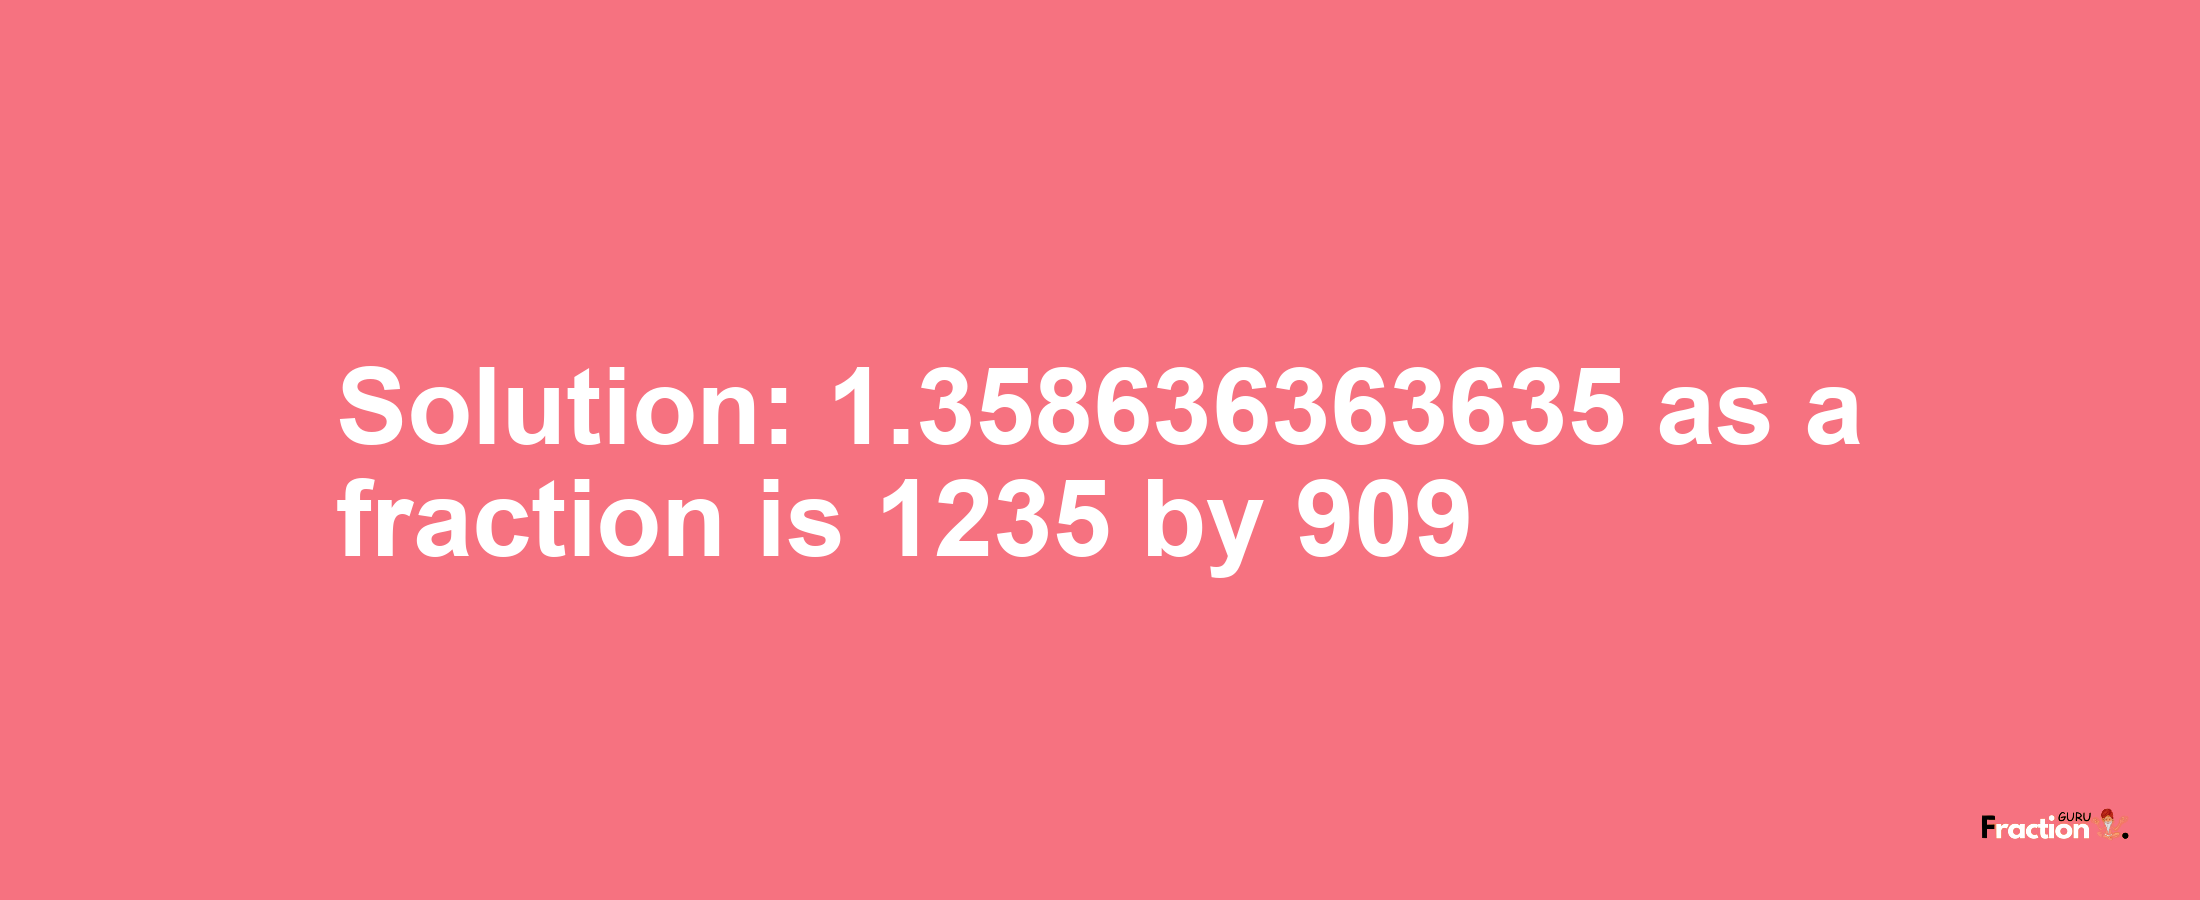 Solution:1.358636363635 as a fraction is 1235/909